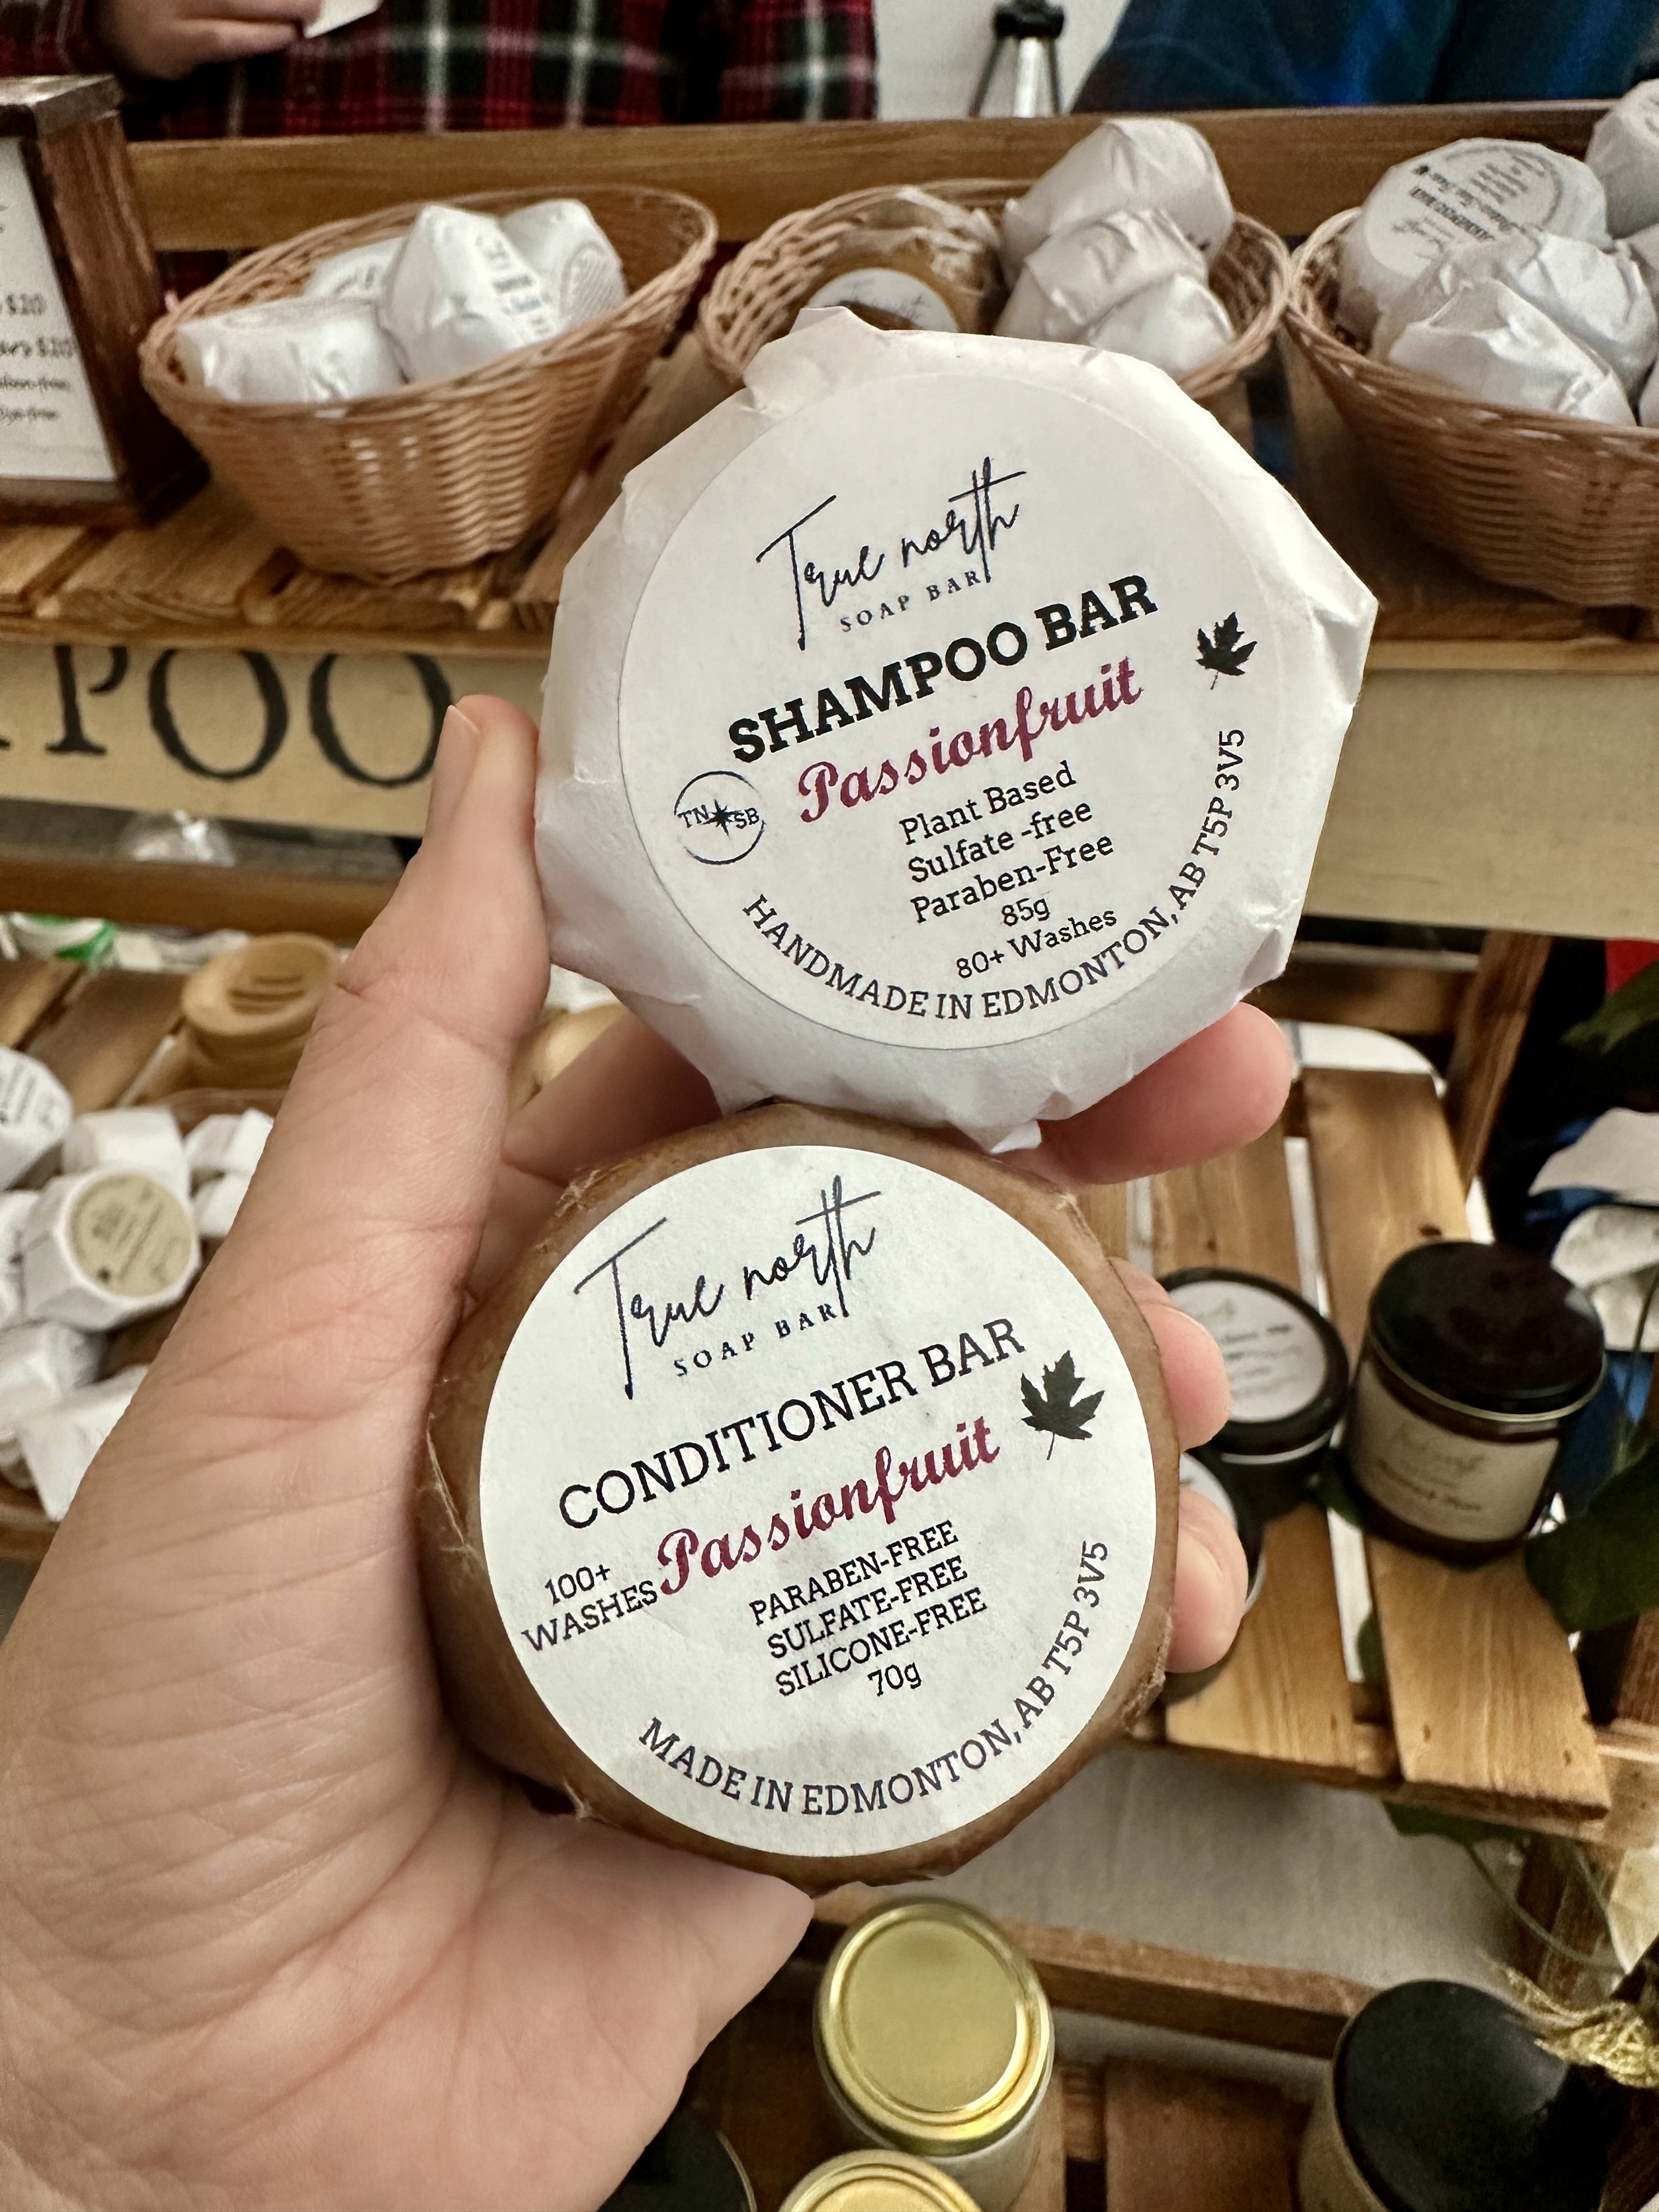 A photo of a conditioner and shampoo bar